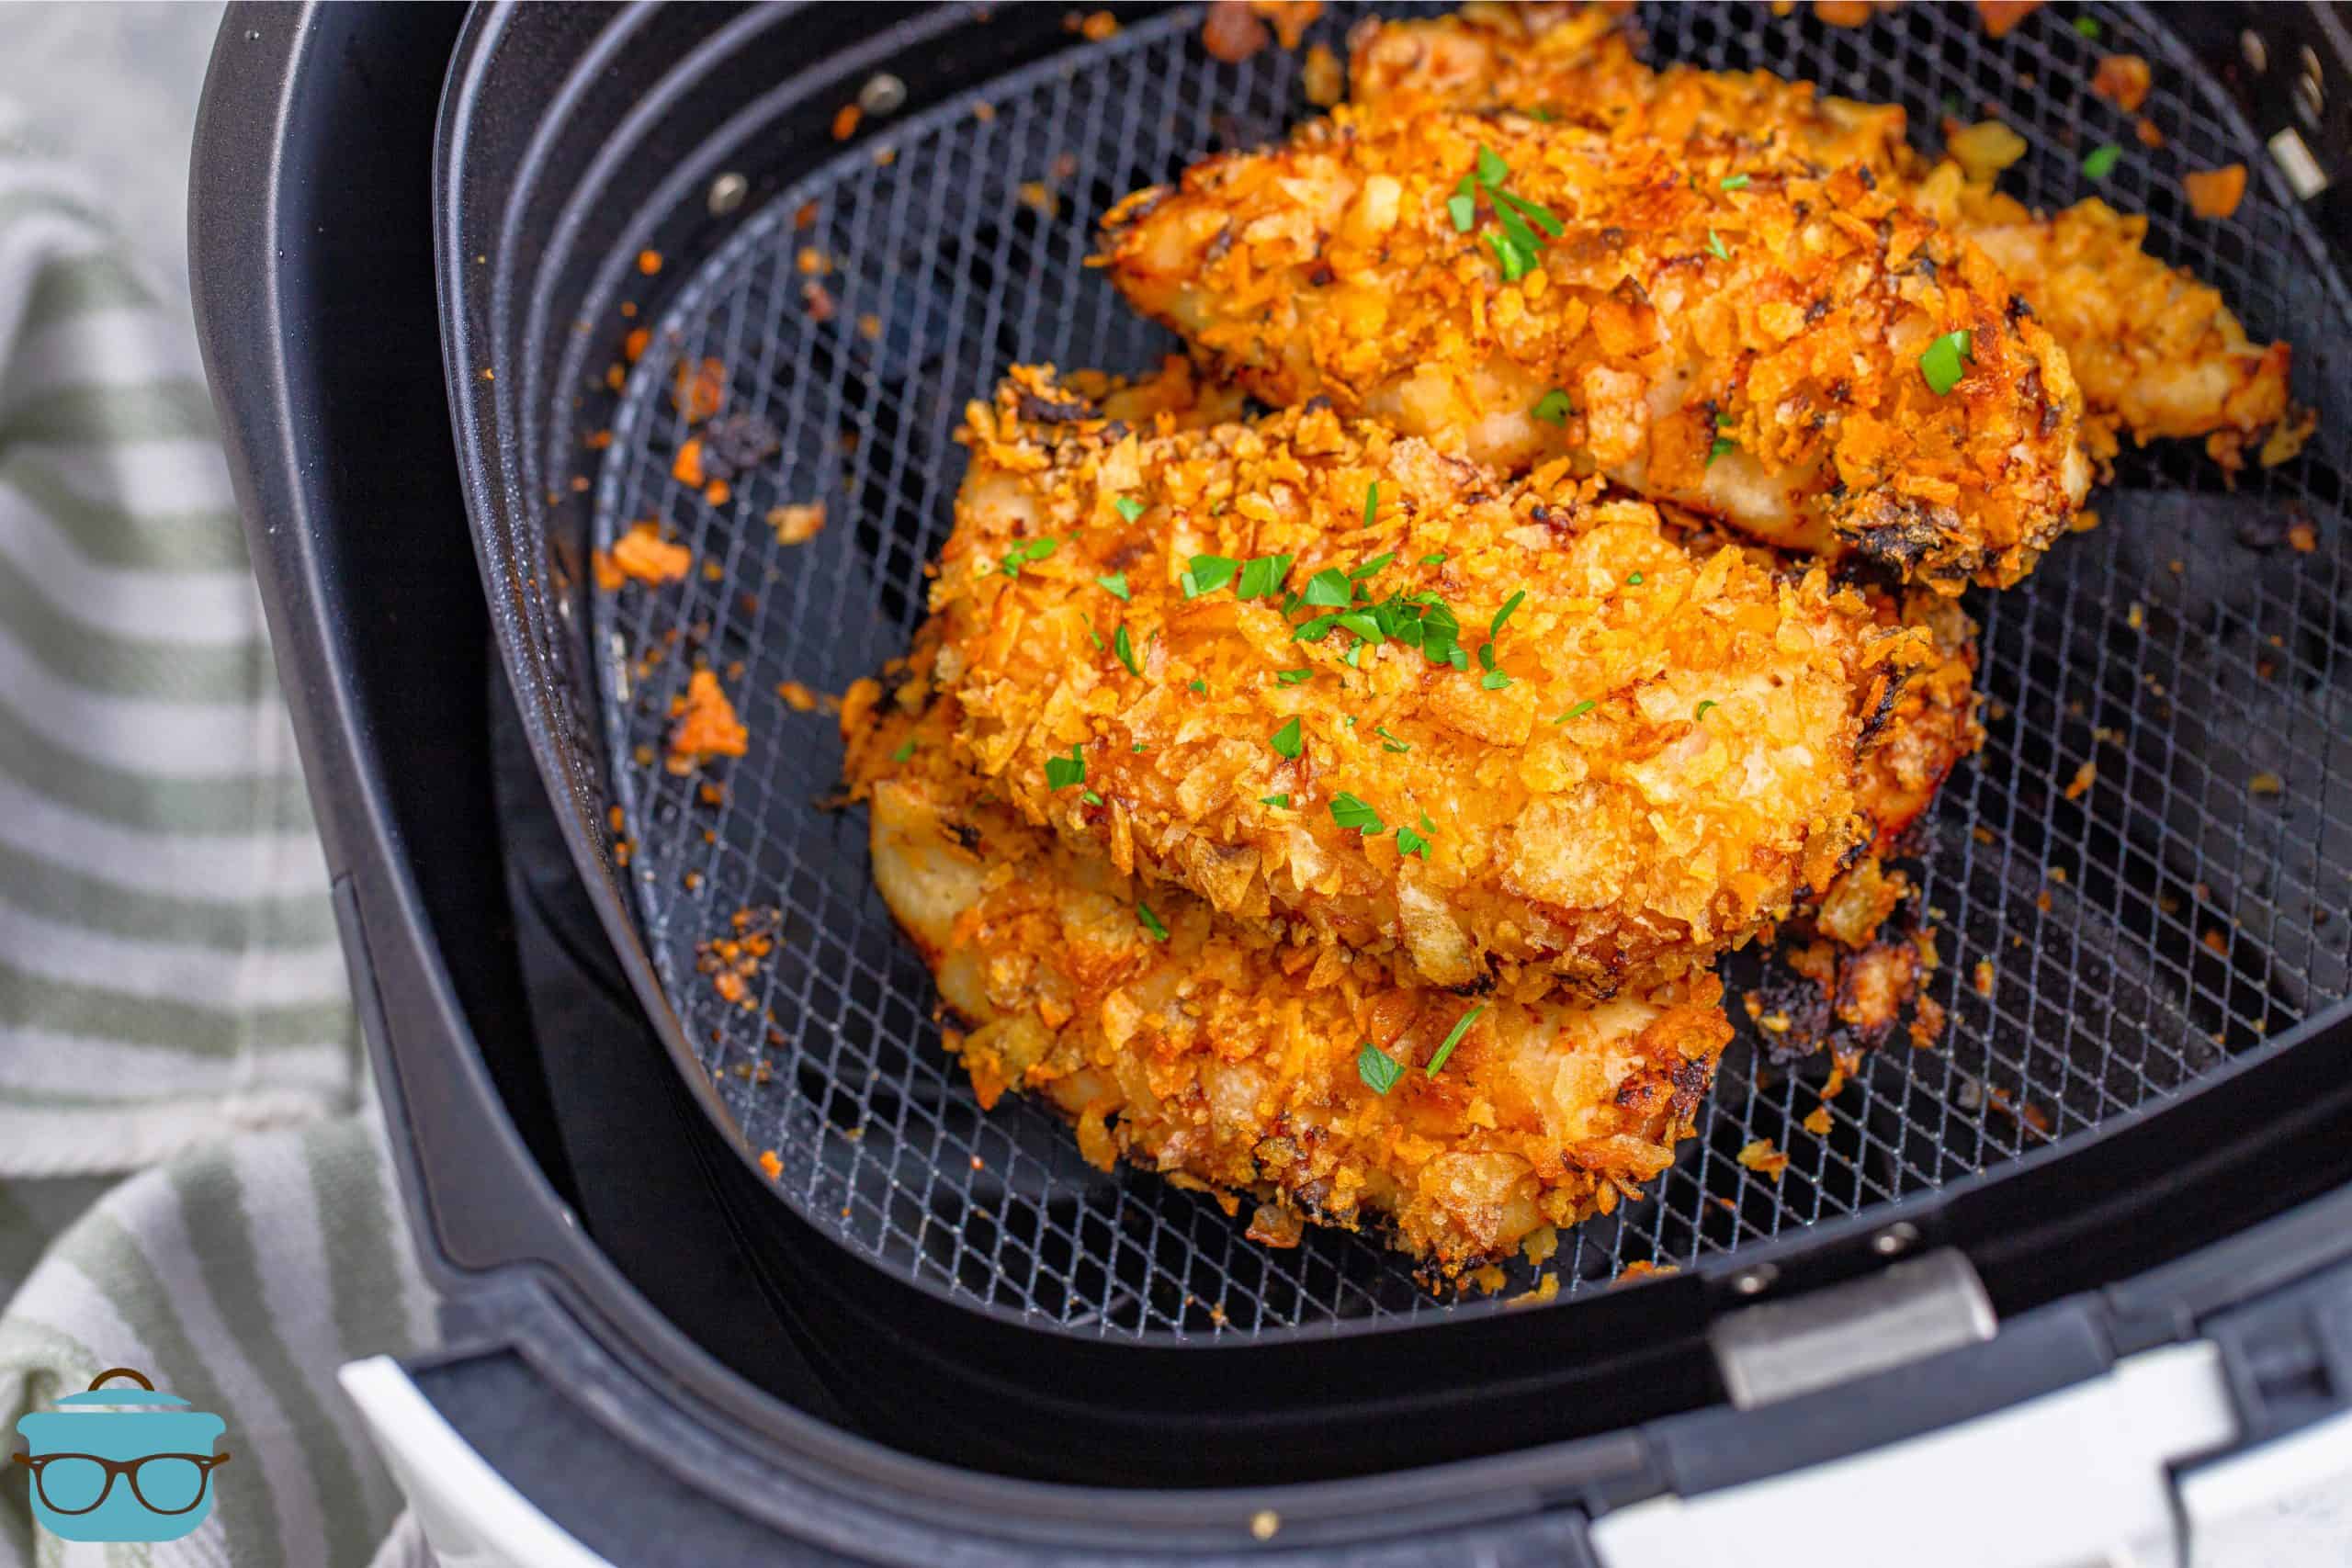 Crispy, fully cooked chicken tenders shown in the bottom of an air fryer basket.